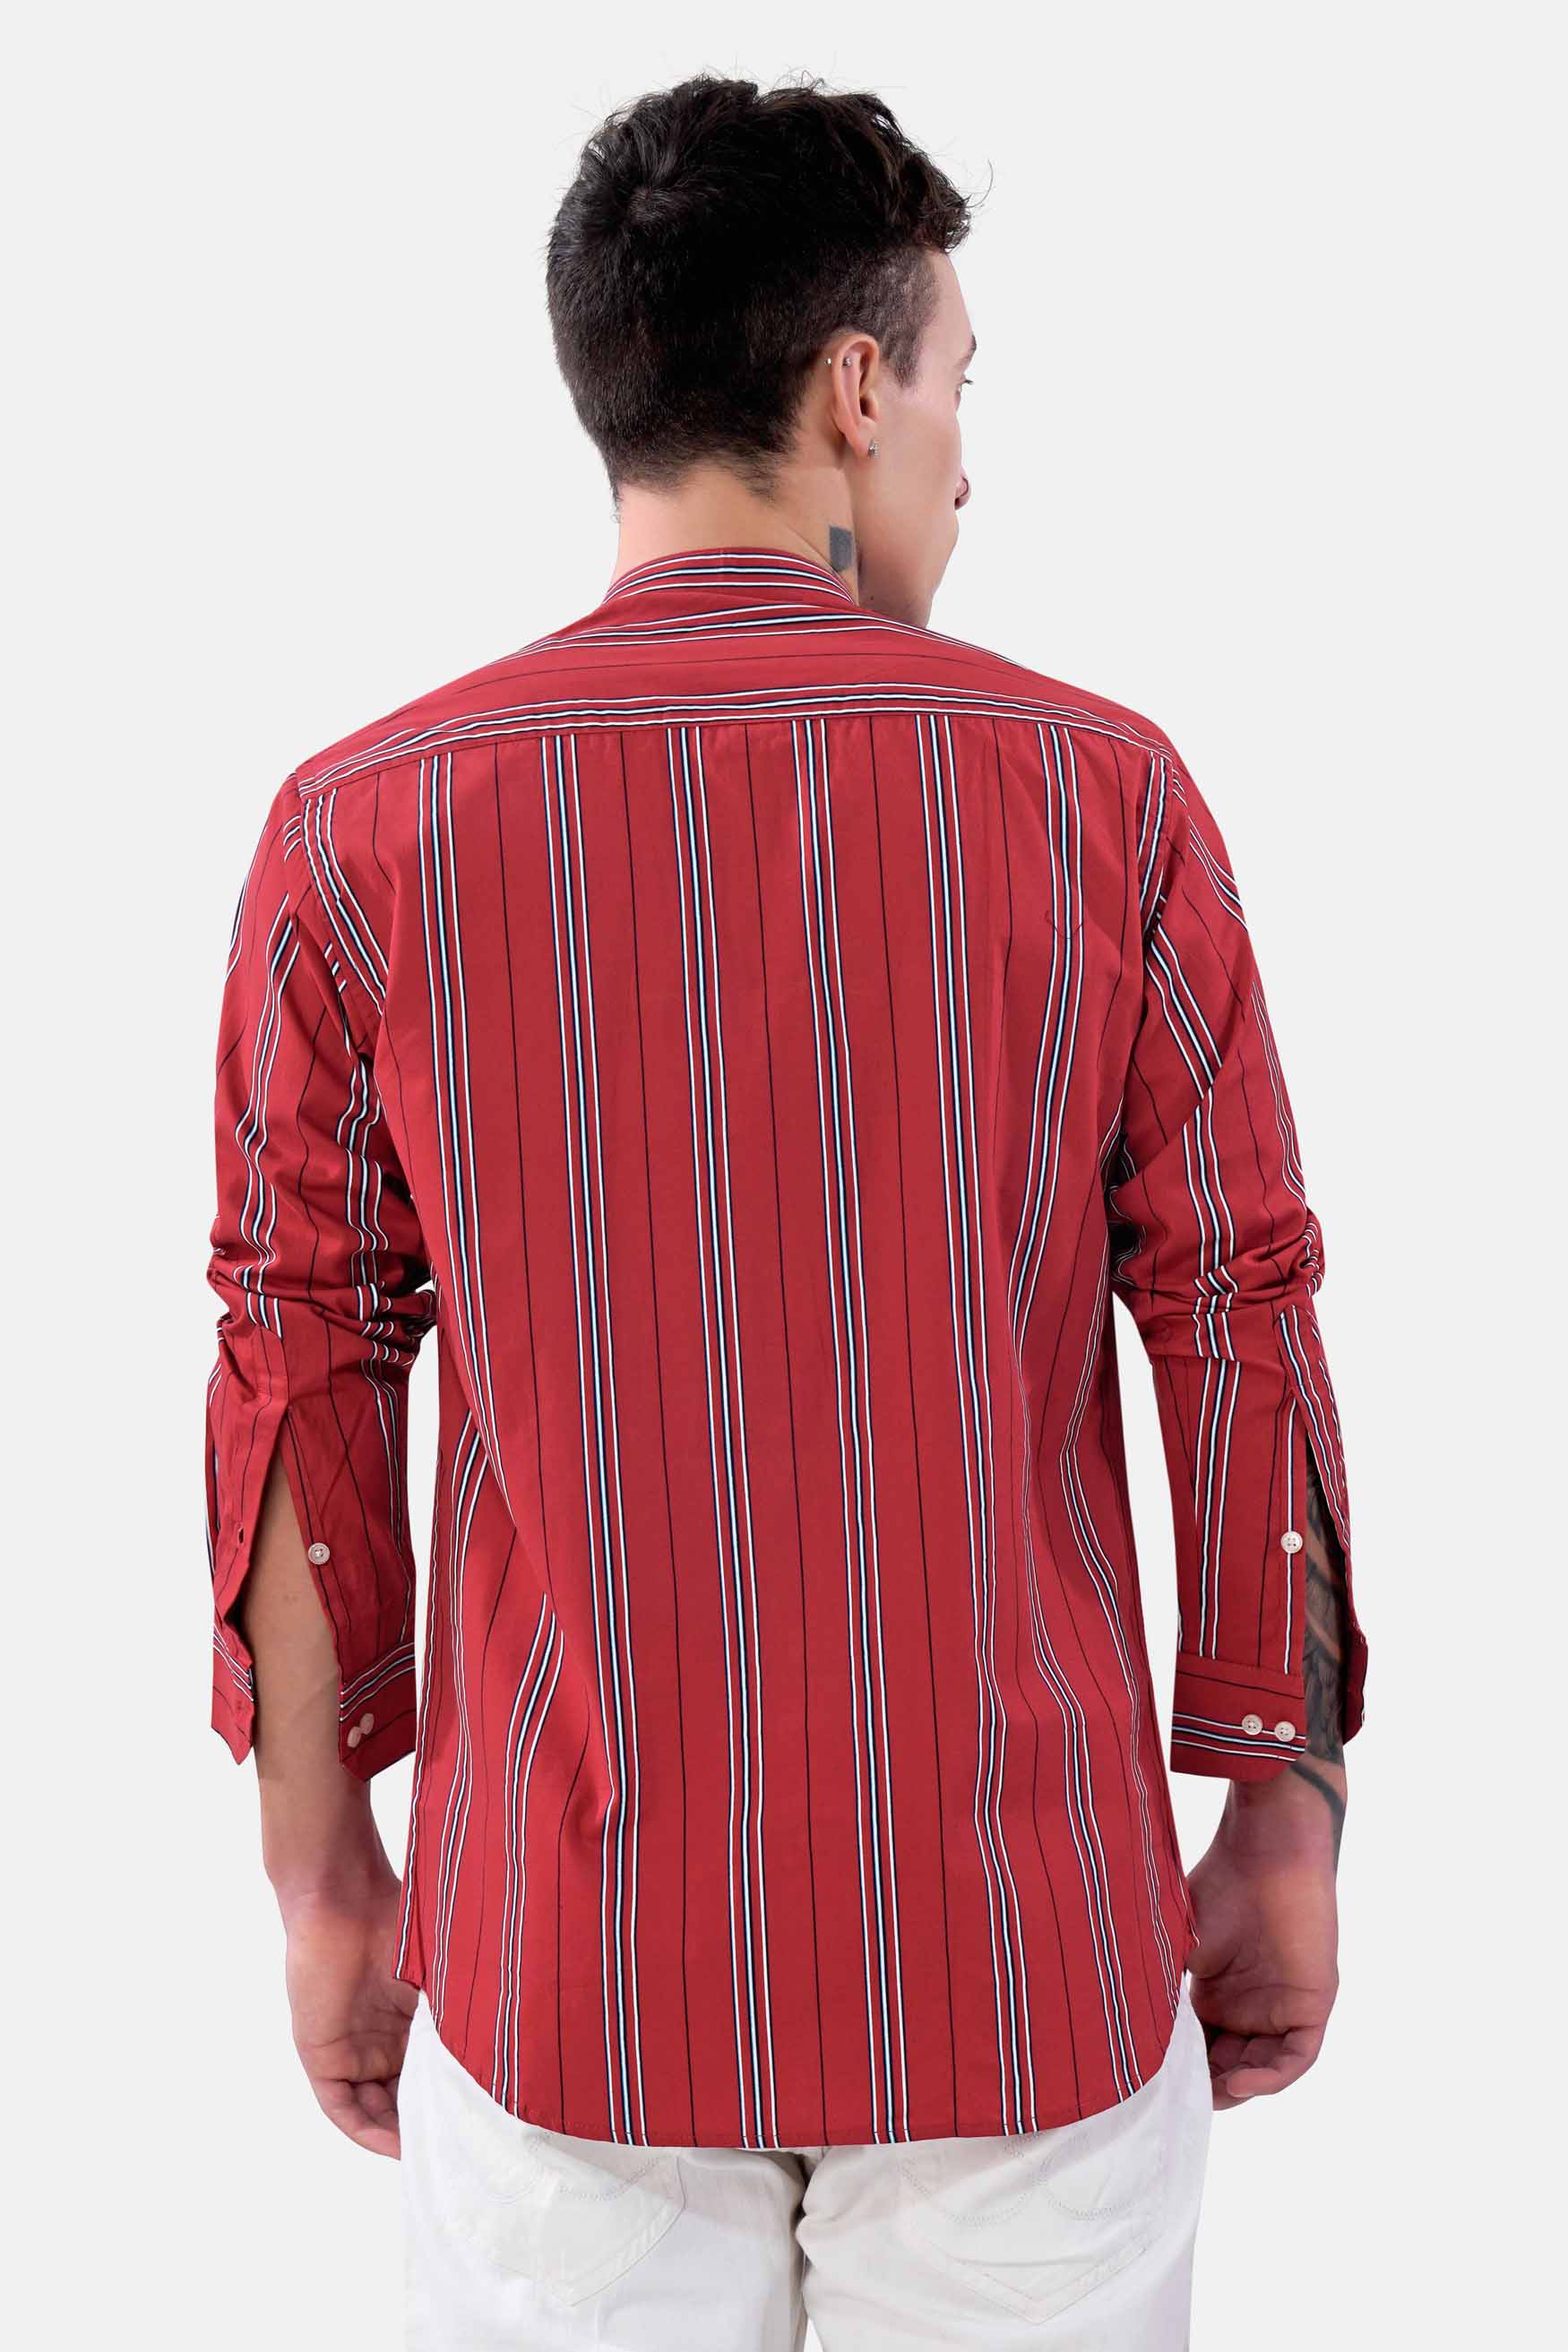 Cardinal Red with White and Cove Blue Striped Twill Premium Cotton Shirt